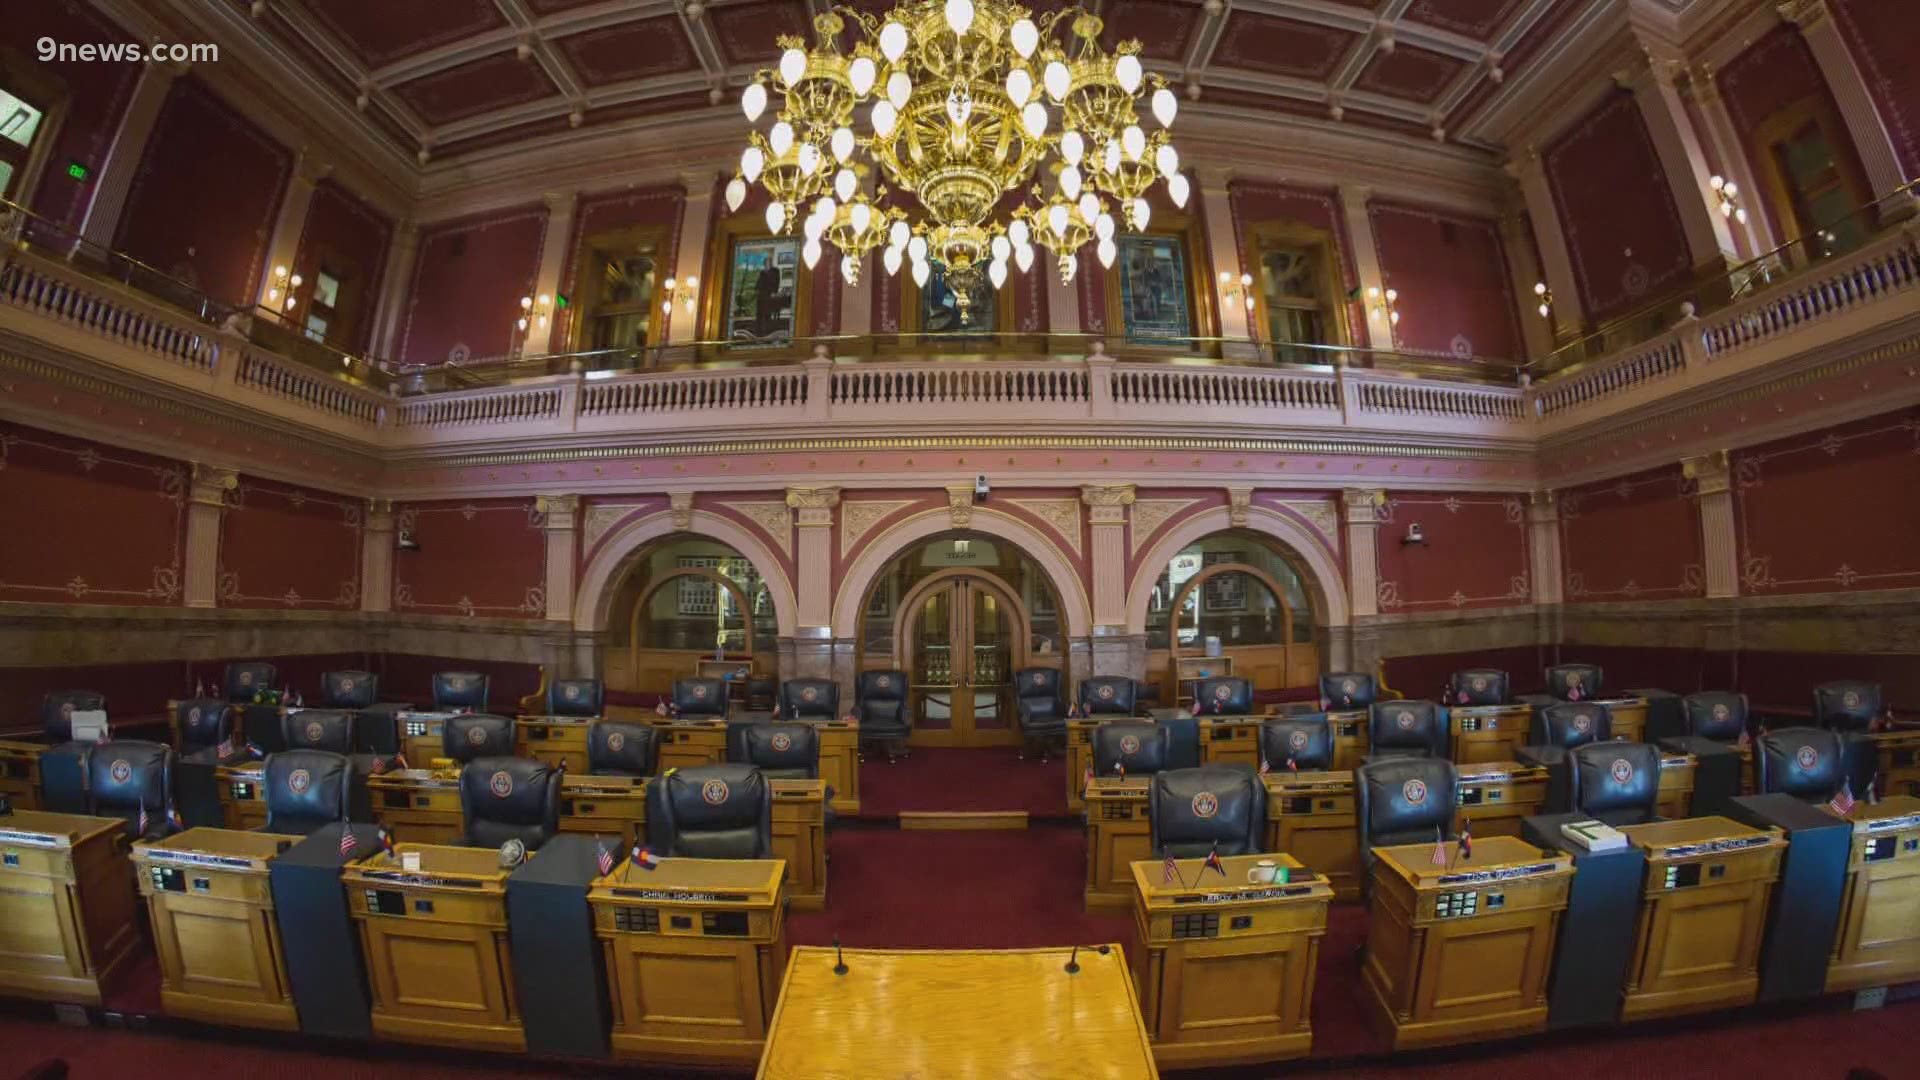 Colorado lawmakers will pause their upcoming new legislative session soon after convening in January as they wait for COVID-19 cases to subside.